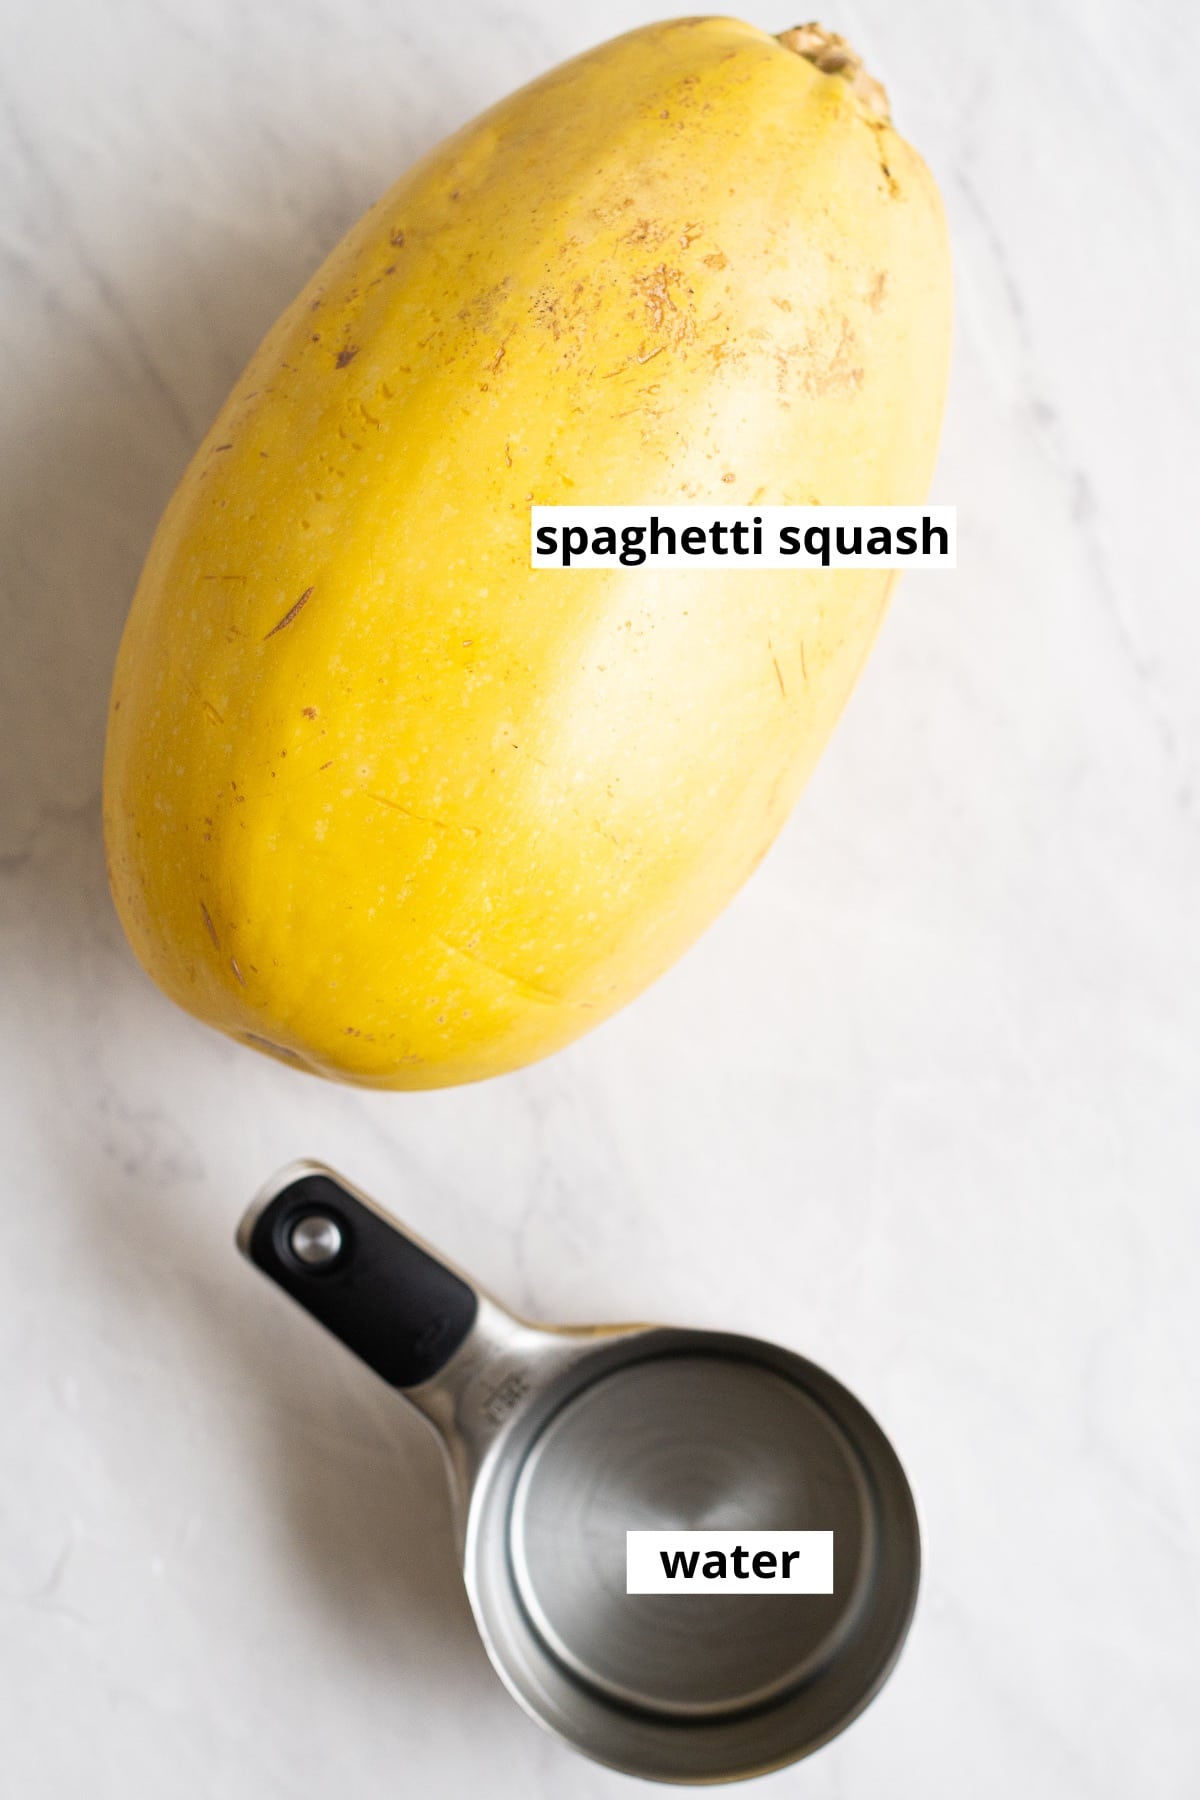 Spaghetti squash on a counter and water in a measuring cup.